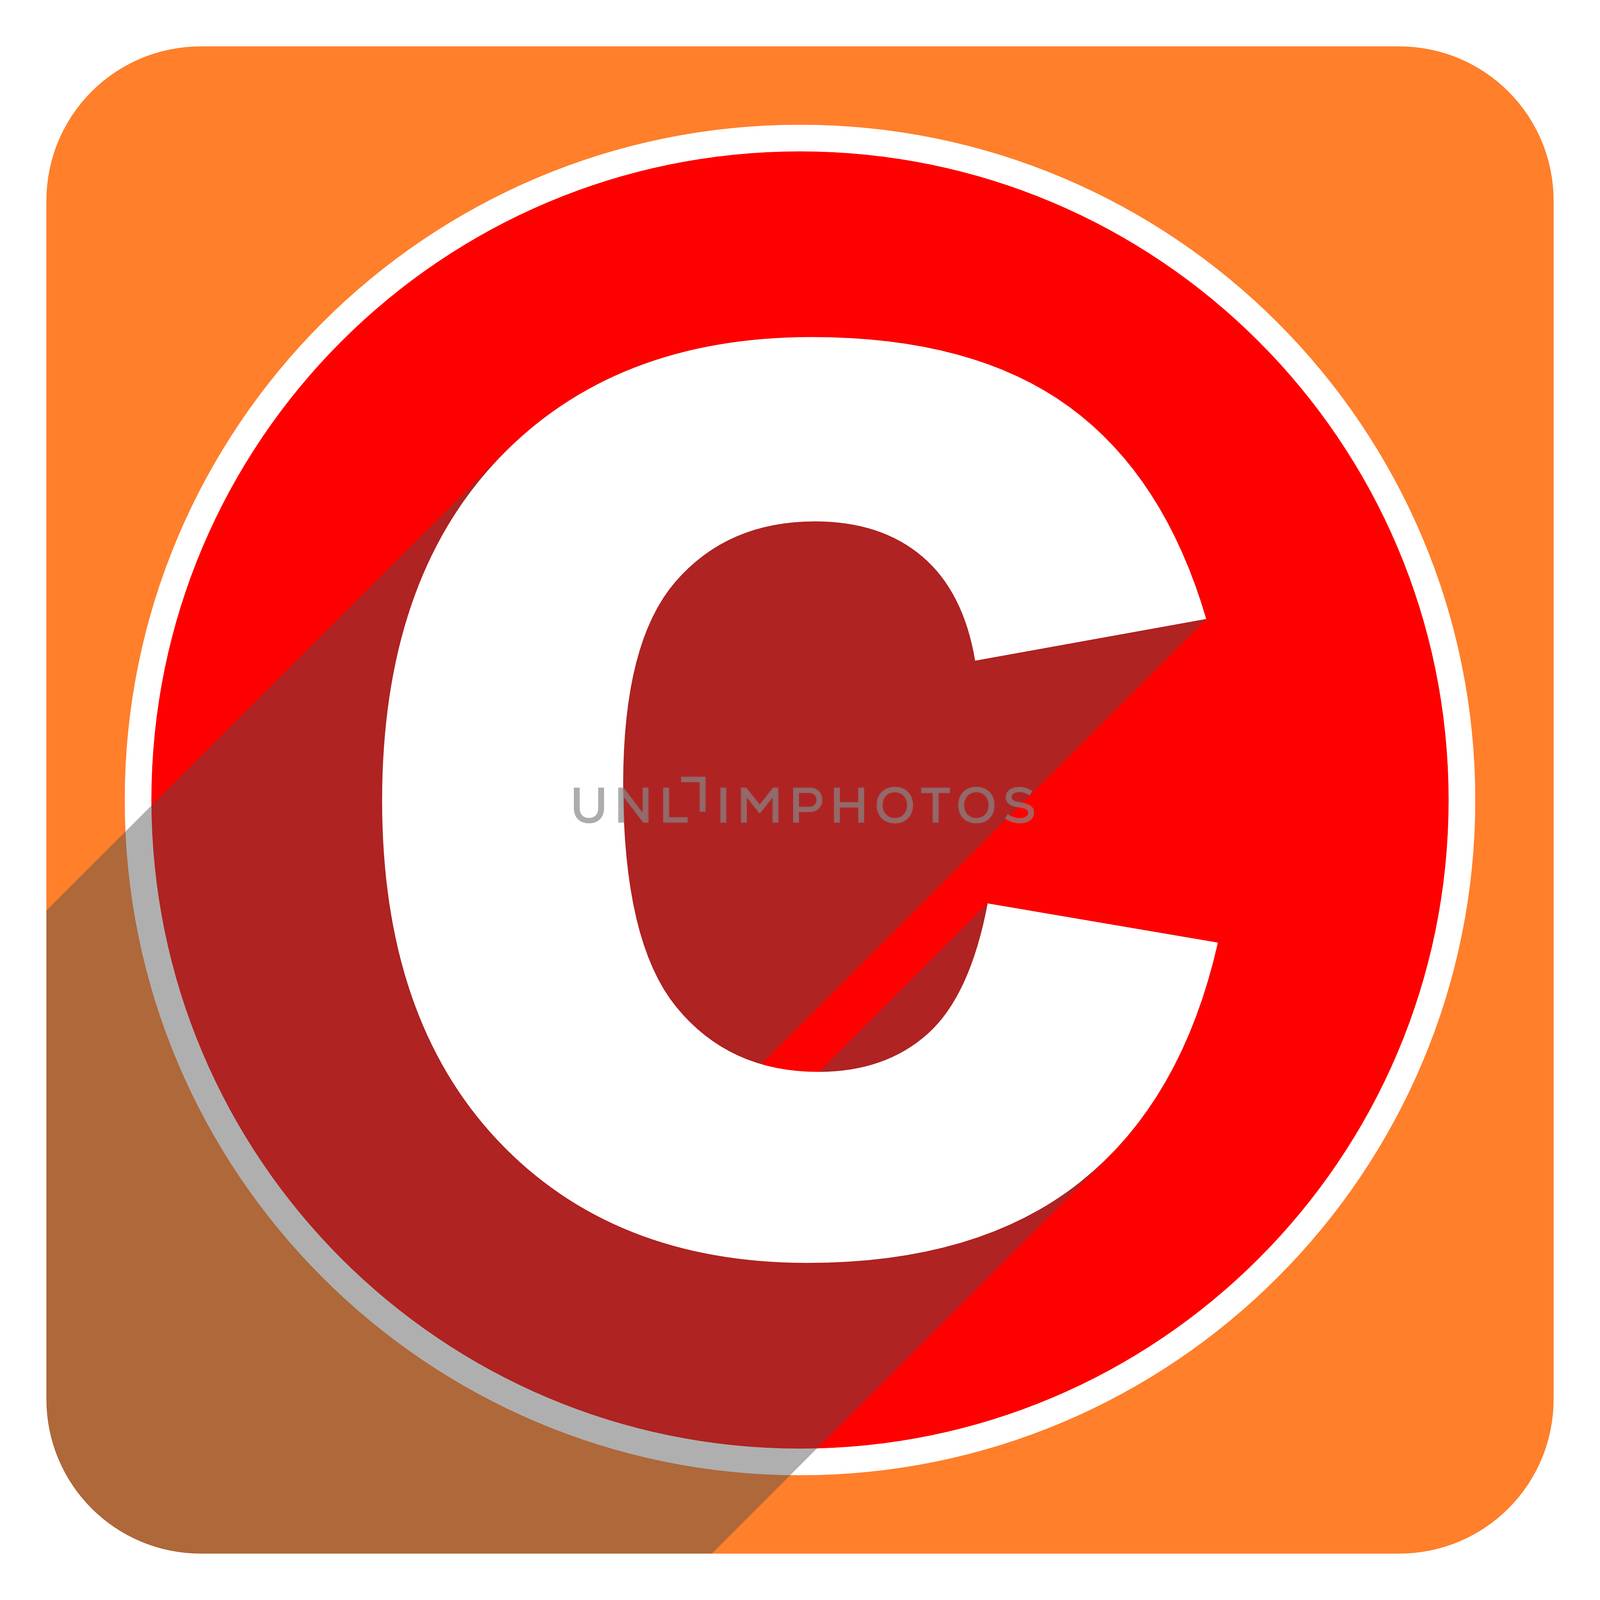 copyright red flat icon isolated